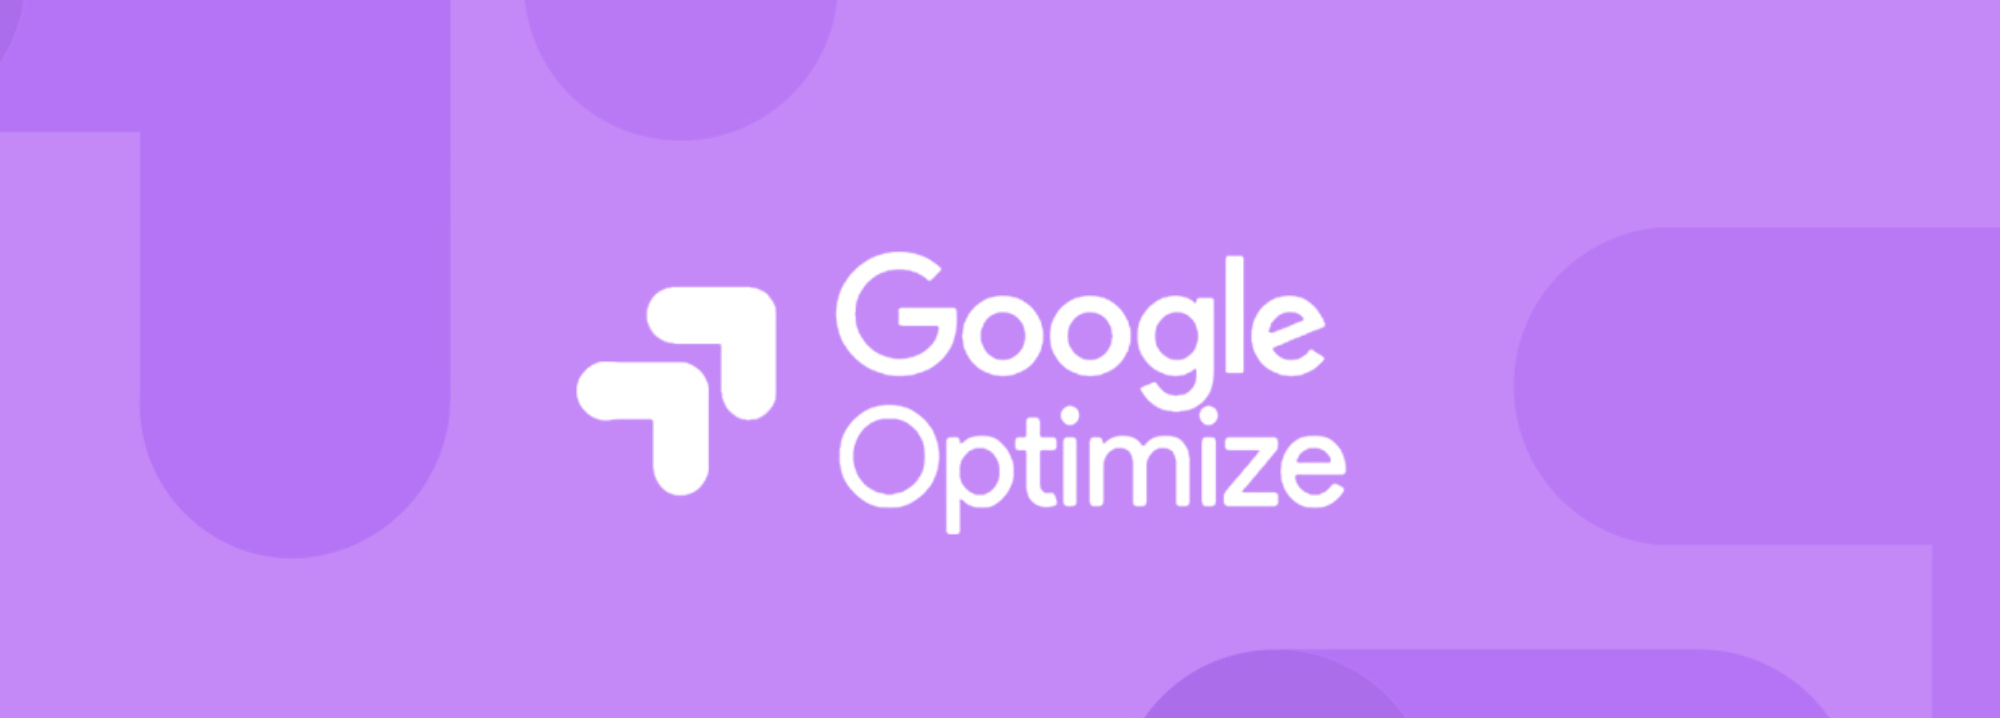 Google Optimize Sunsetting. Great Alternatives from Sitecore and Acquia